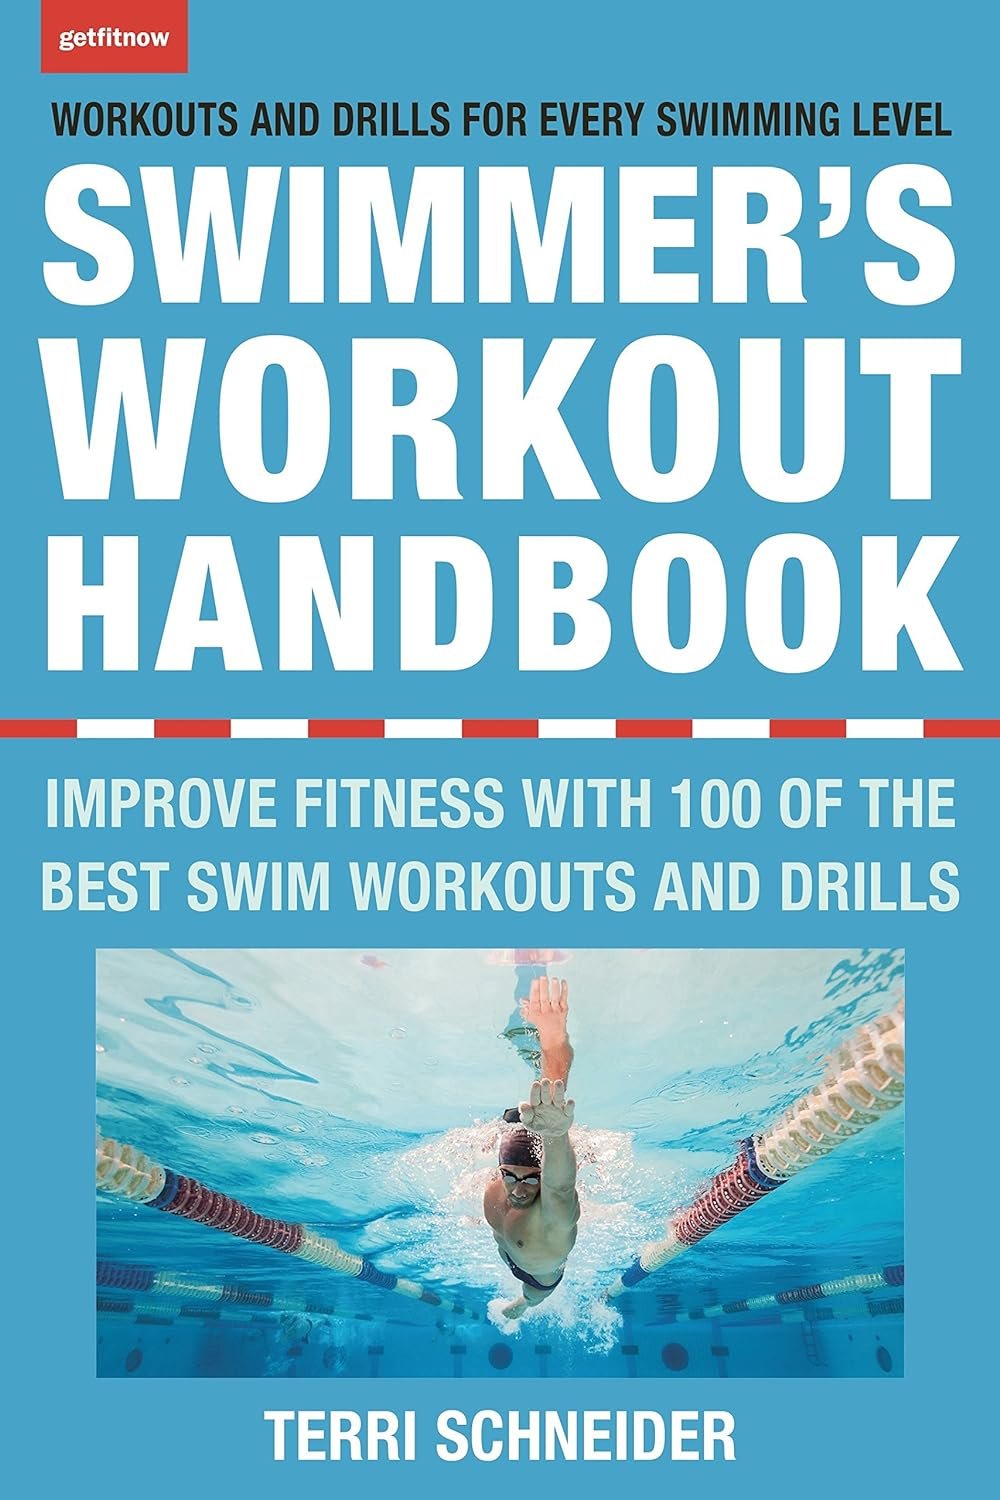 The Swimmer's Workout Handbook: Improve Fitness with 100 Swim Workouts and Drills